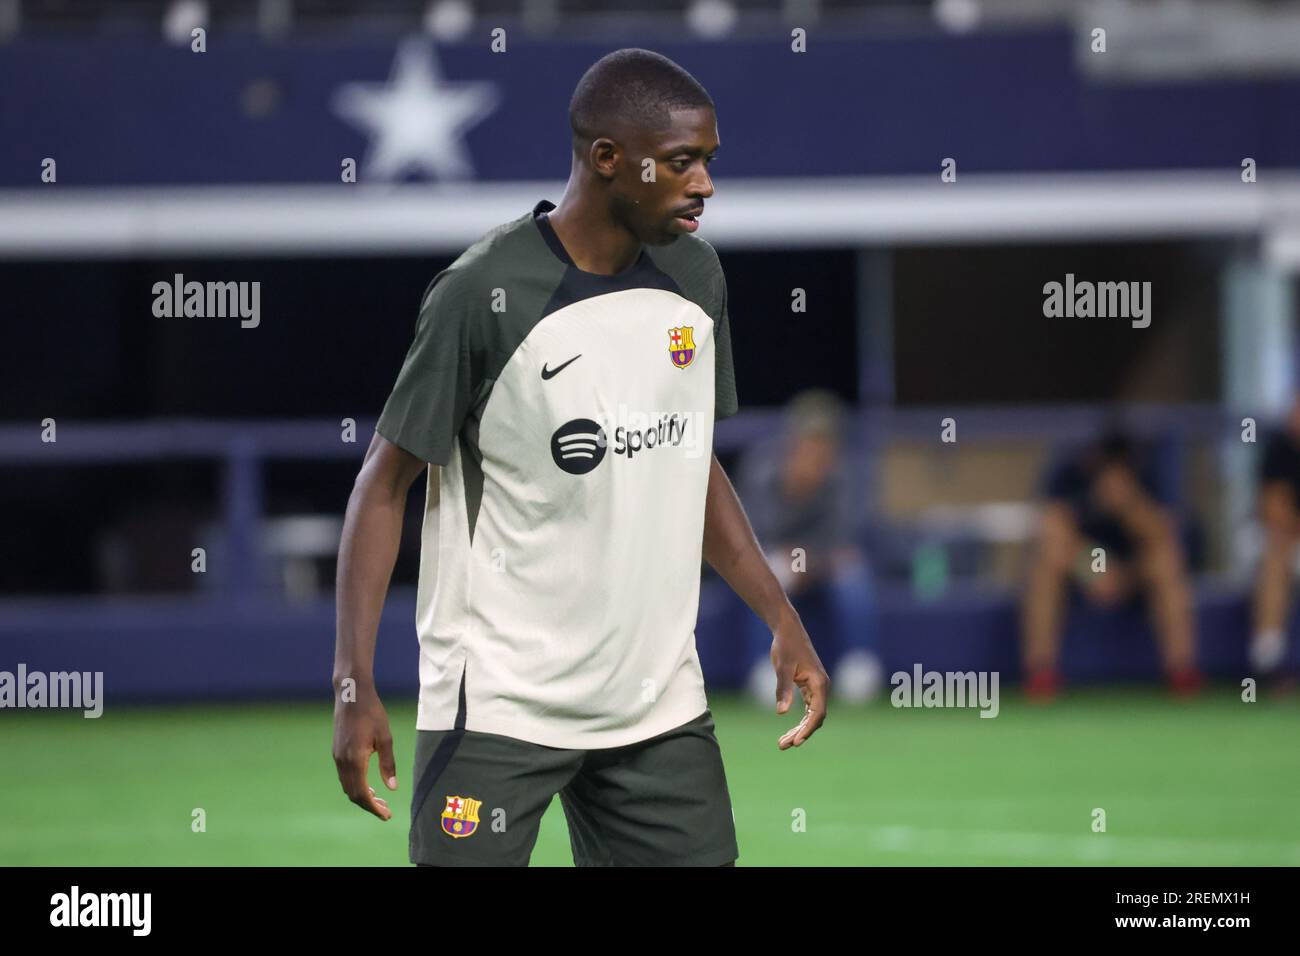 Dallas, United States. 28th July, 2023. Ousmane Dembélé of Barcelona during a training session at AT&T Stadium in Dallas in the United States this Friday, July 28. Tomorrow the team faces Real Madrid Credit: Brazil Photo Press/Alamy Live News Stock Photo